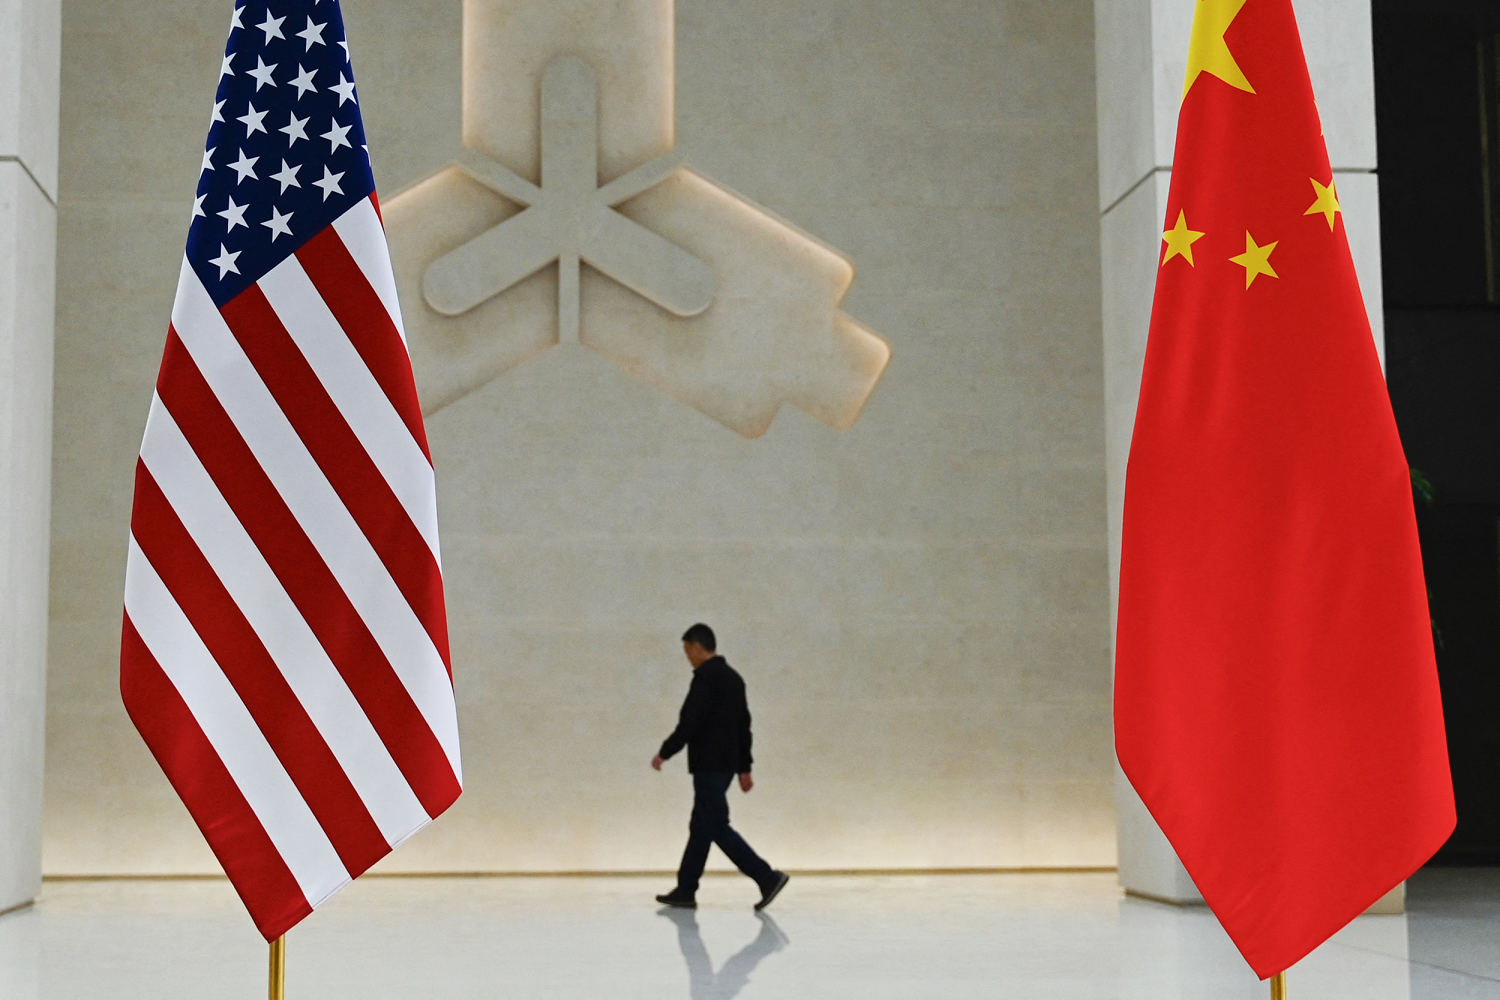 Over 40% of Americans now see China as an enemy, a five-year high, a Pew report finds